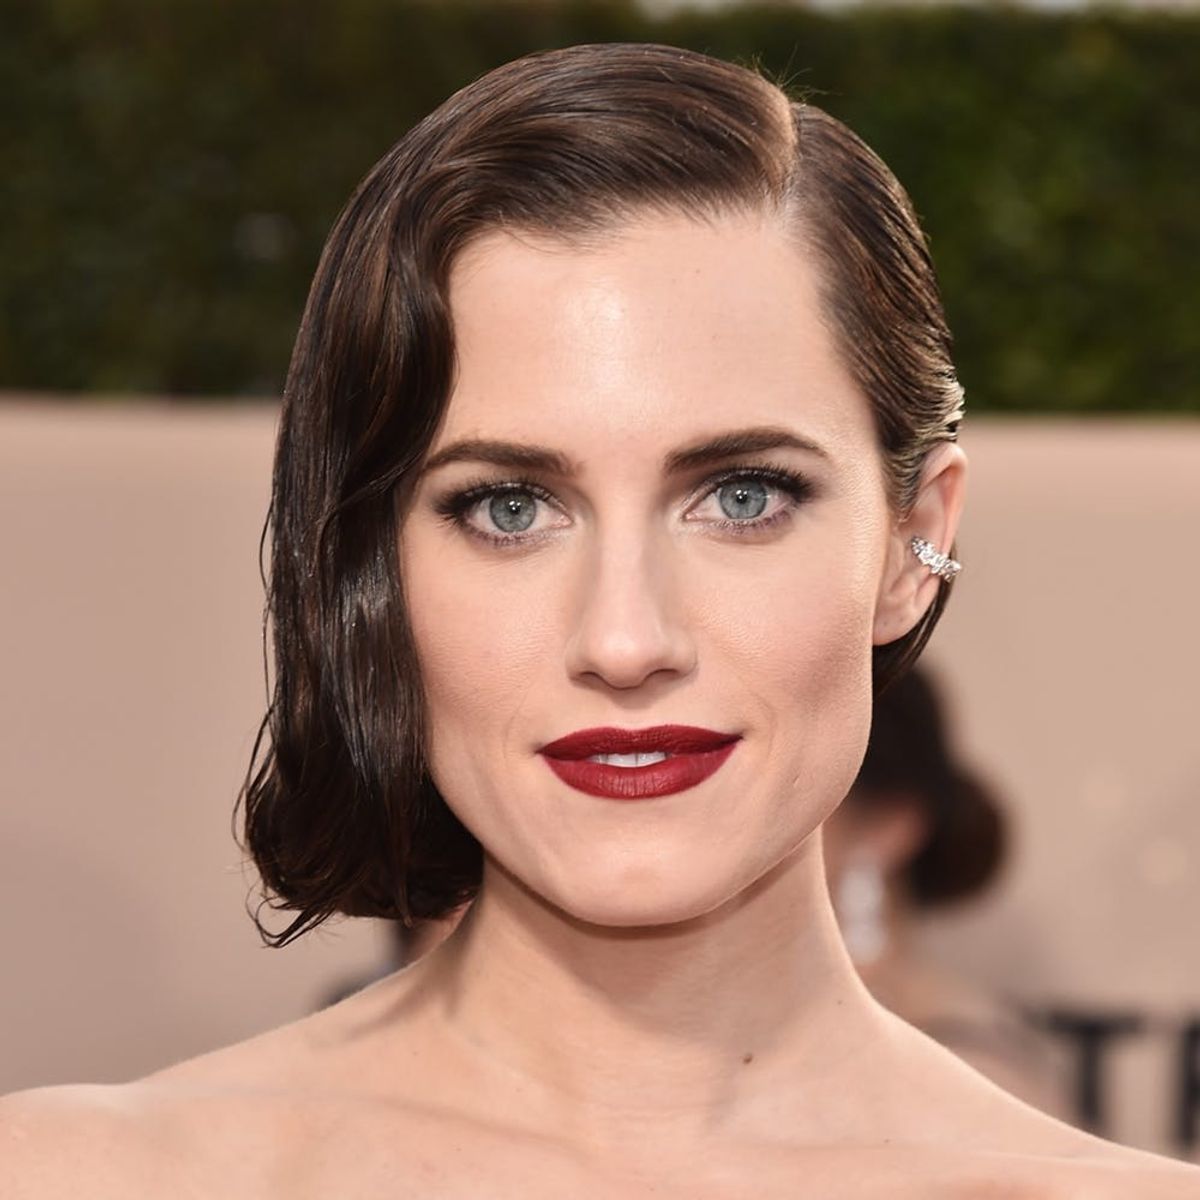 Allison Williams Pulled Off a ‘Great Gatsby’ Style Fashion Heist on the 2018 SAG Awards Carpet